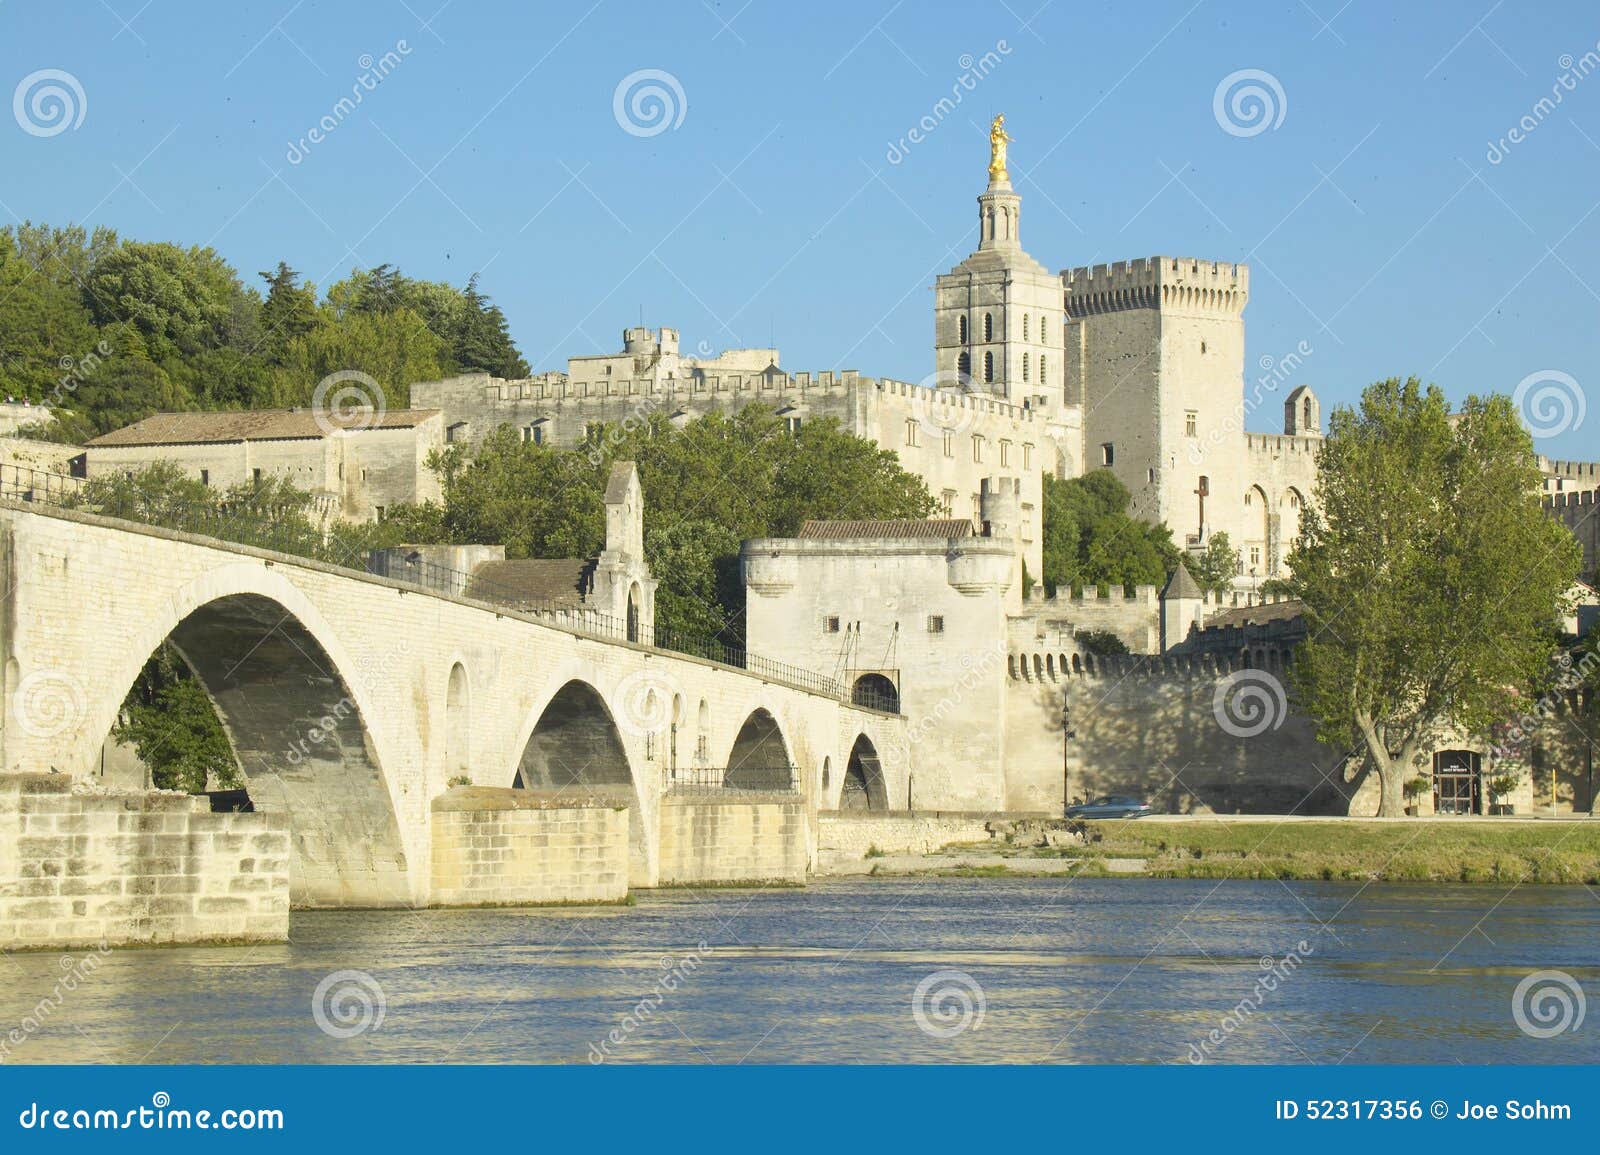 le pont st. benezet and palace of the popes and rhone river, avignon, france